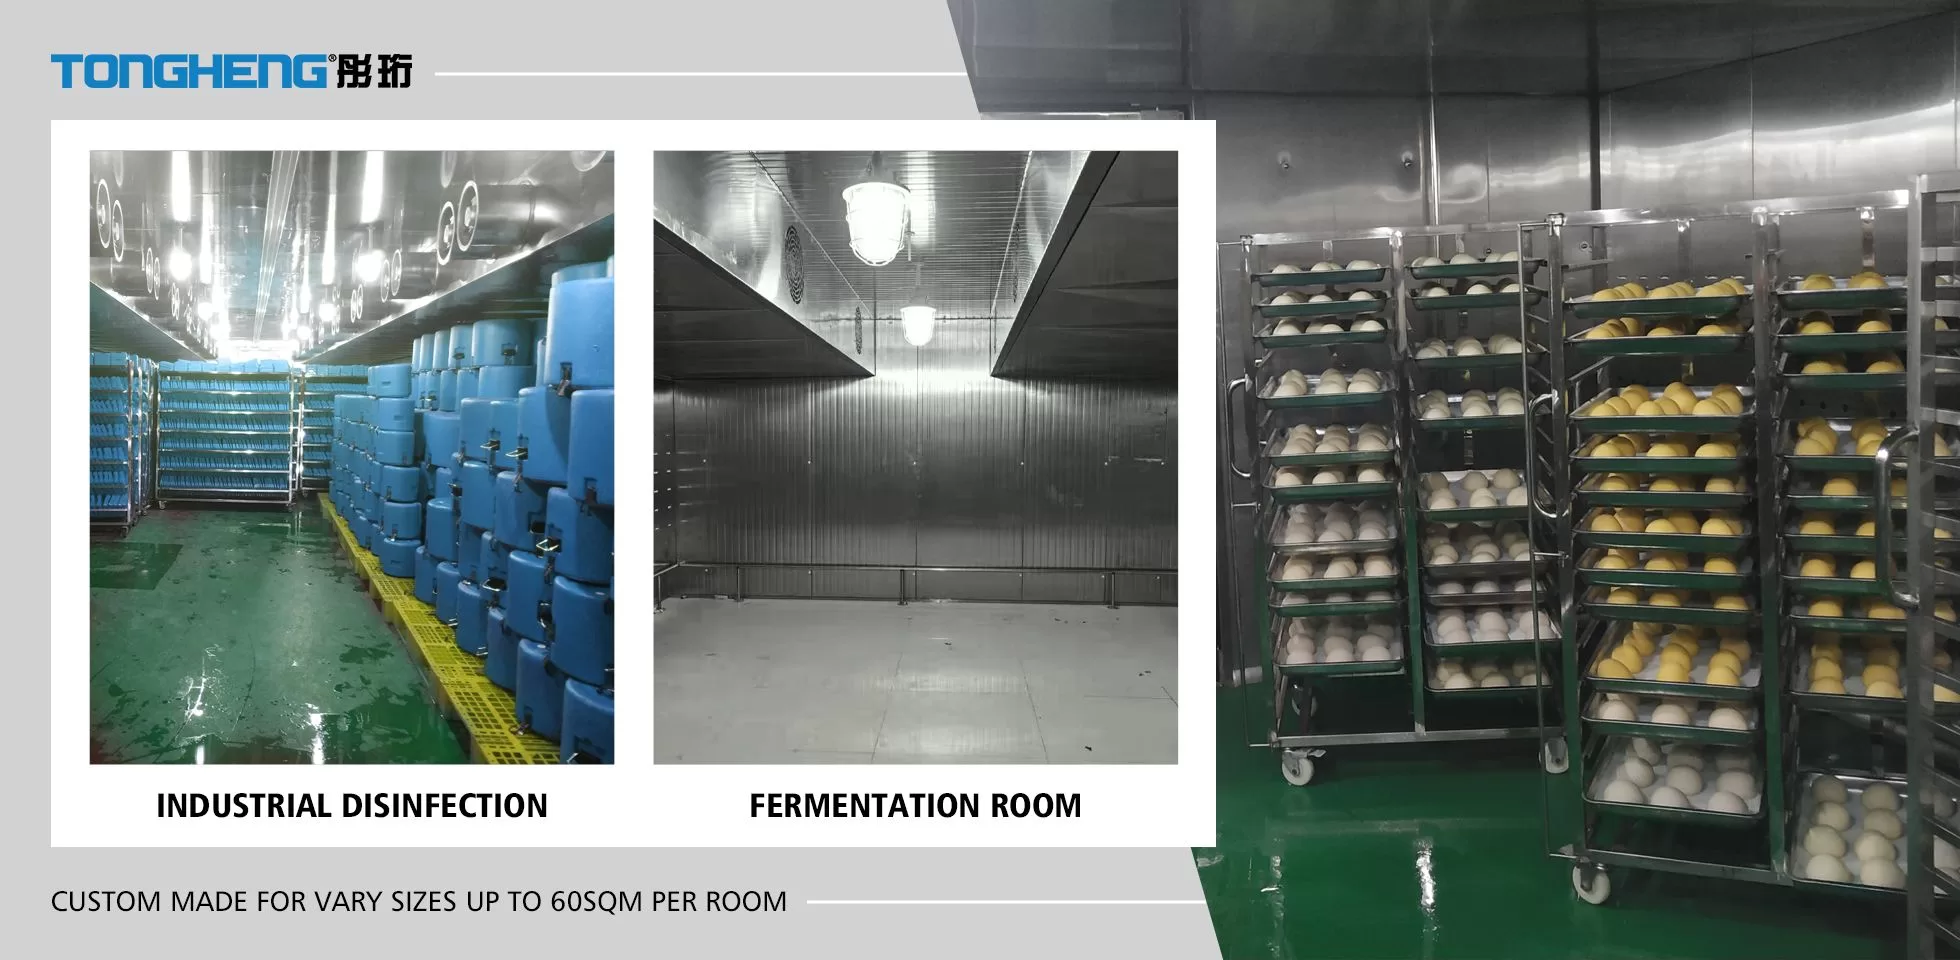 INDUSTRIAL DISINFECTION & FERMENTATION ROOM